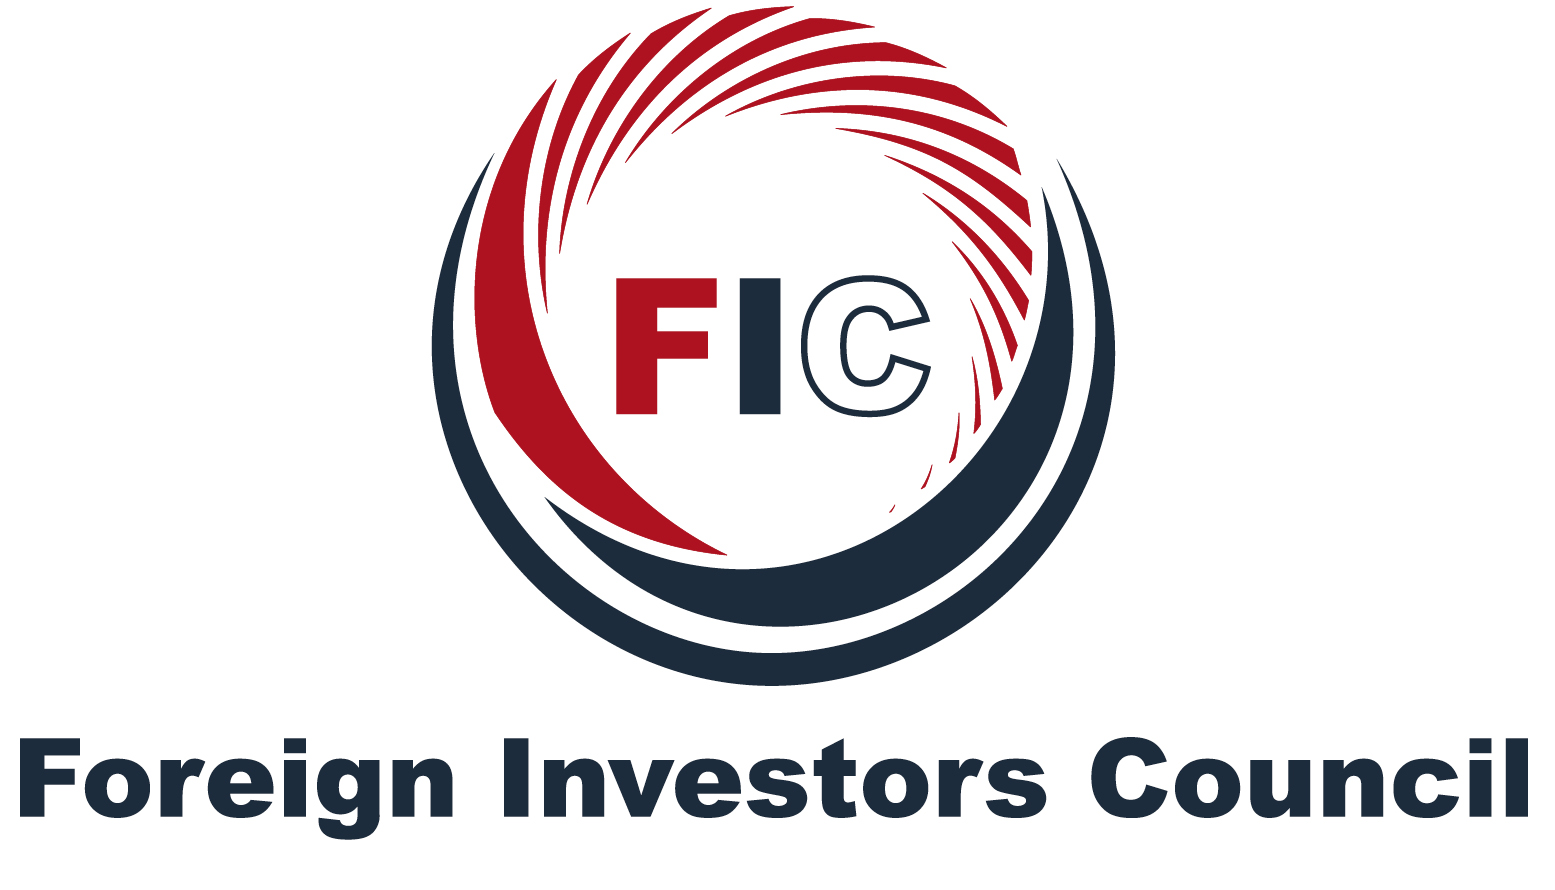 BSCC joins the Foreign Investors Council as an observer member